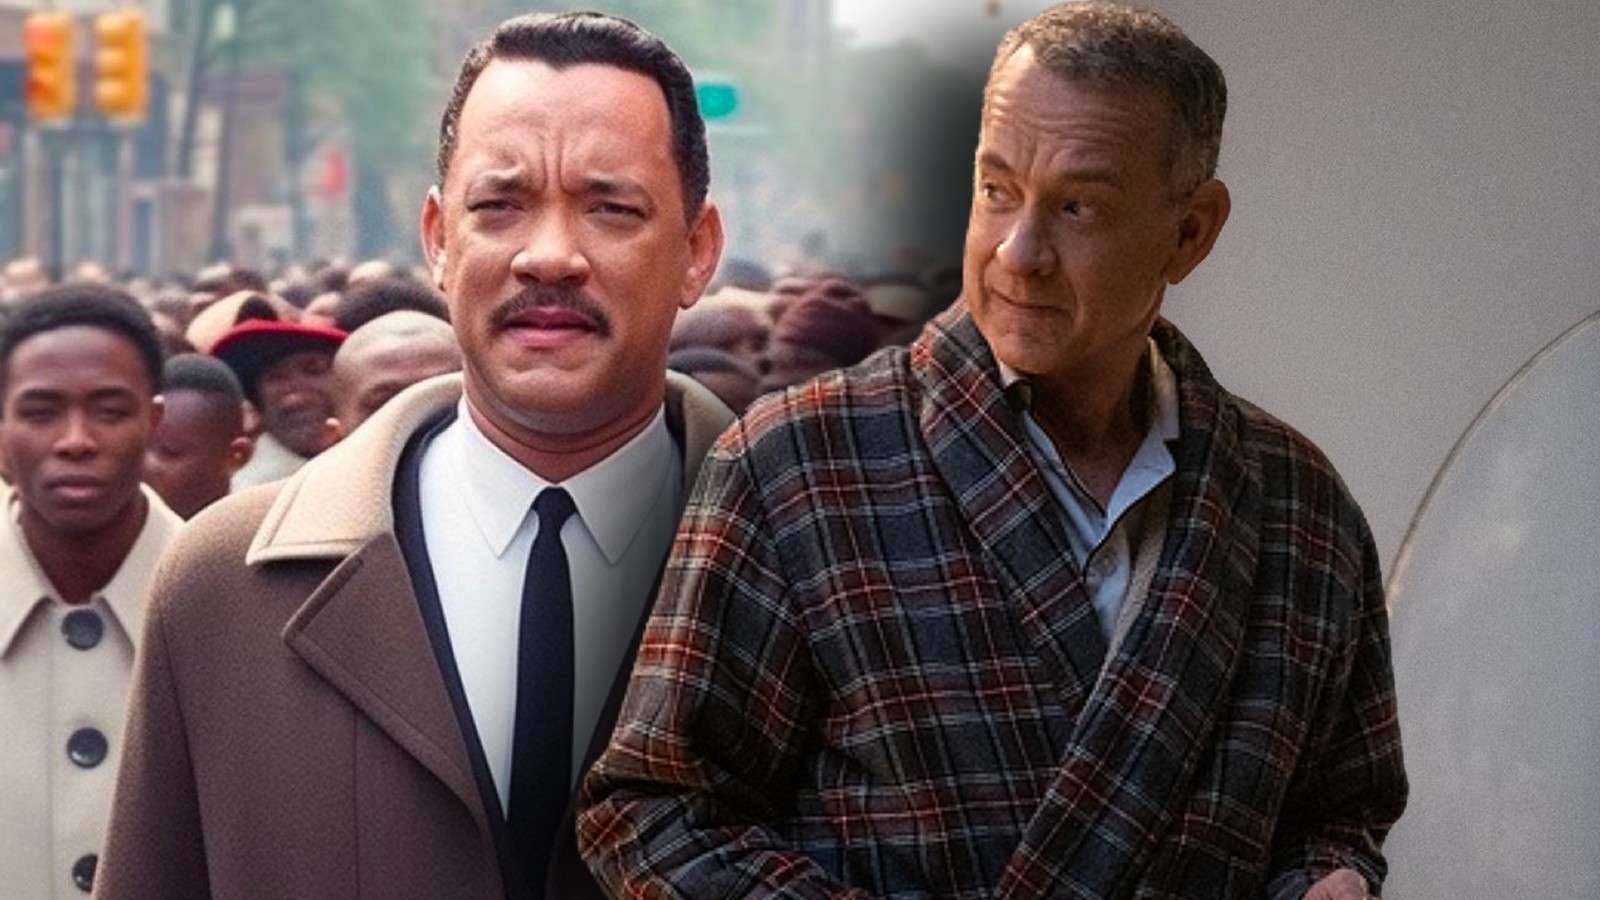 Tom Hanks supposedly as MLK (Martin Luther King) and in A Man Called Otto